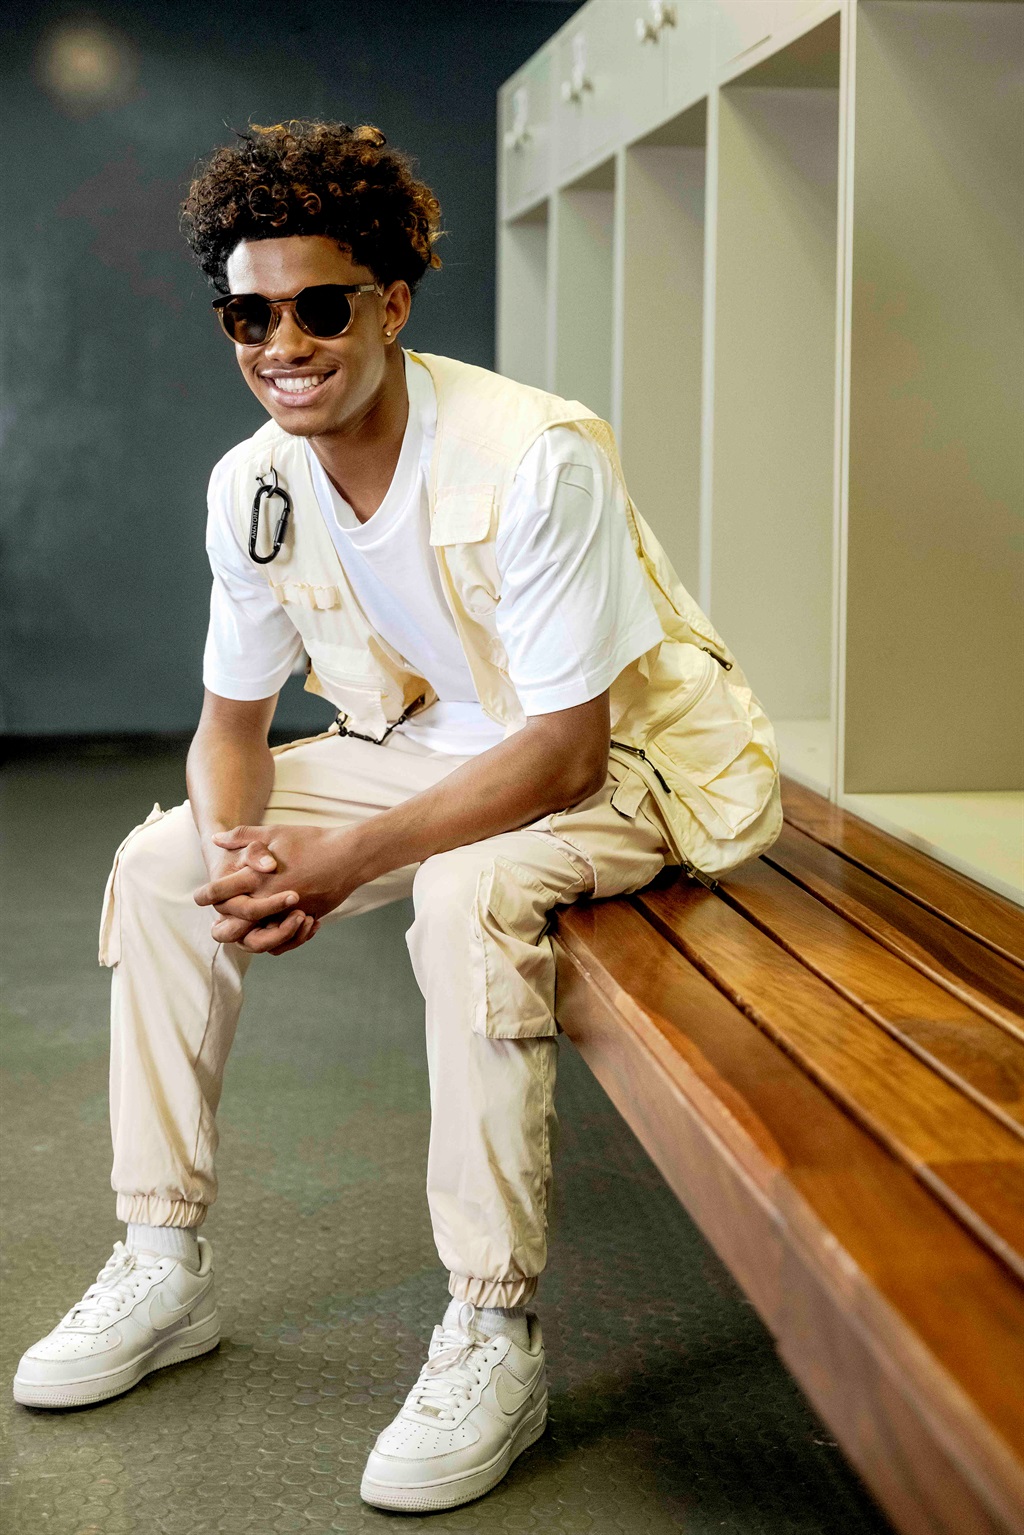 SuperSport United's Shandre Campbell stars in photoshoot with Oakley and Sunglass Hut